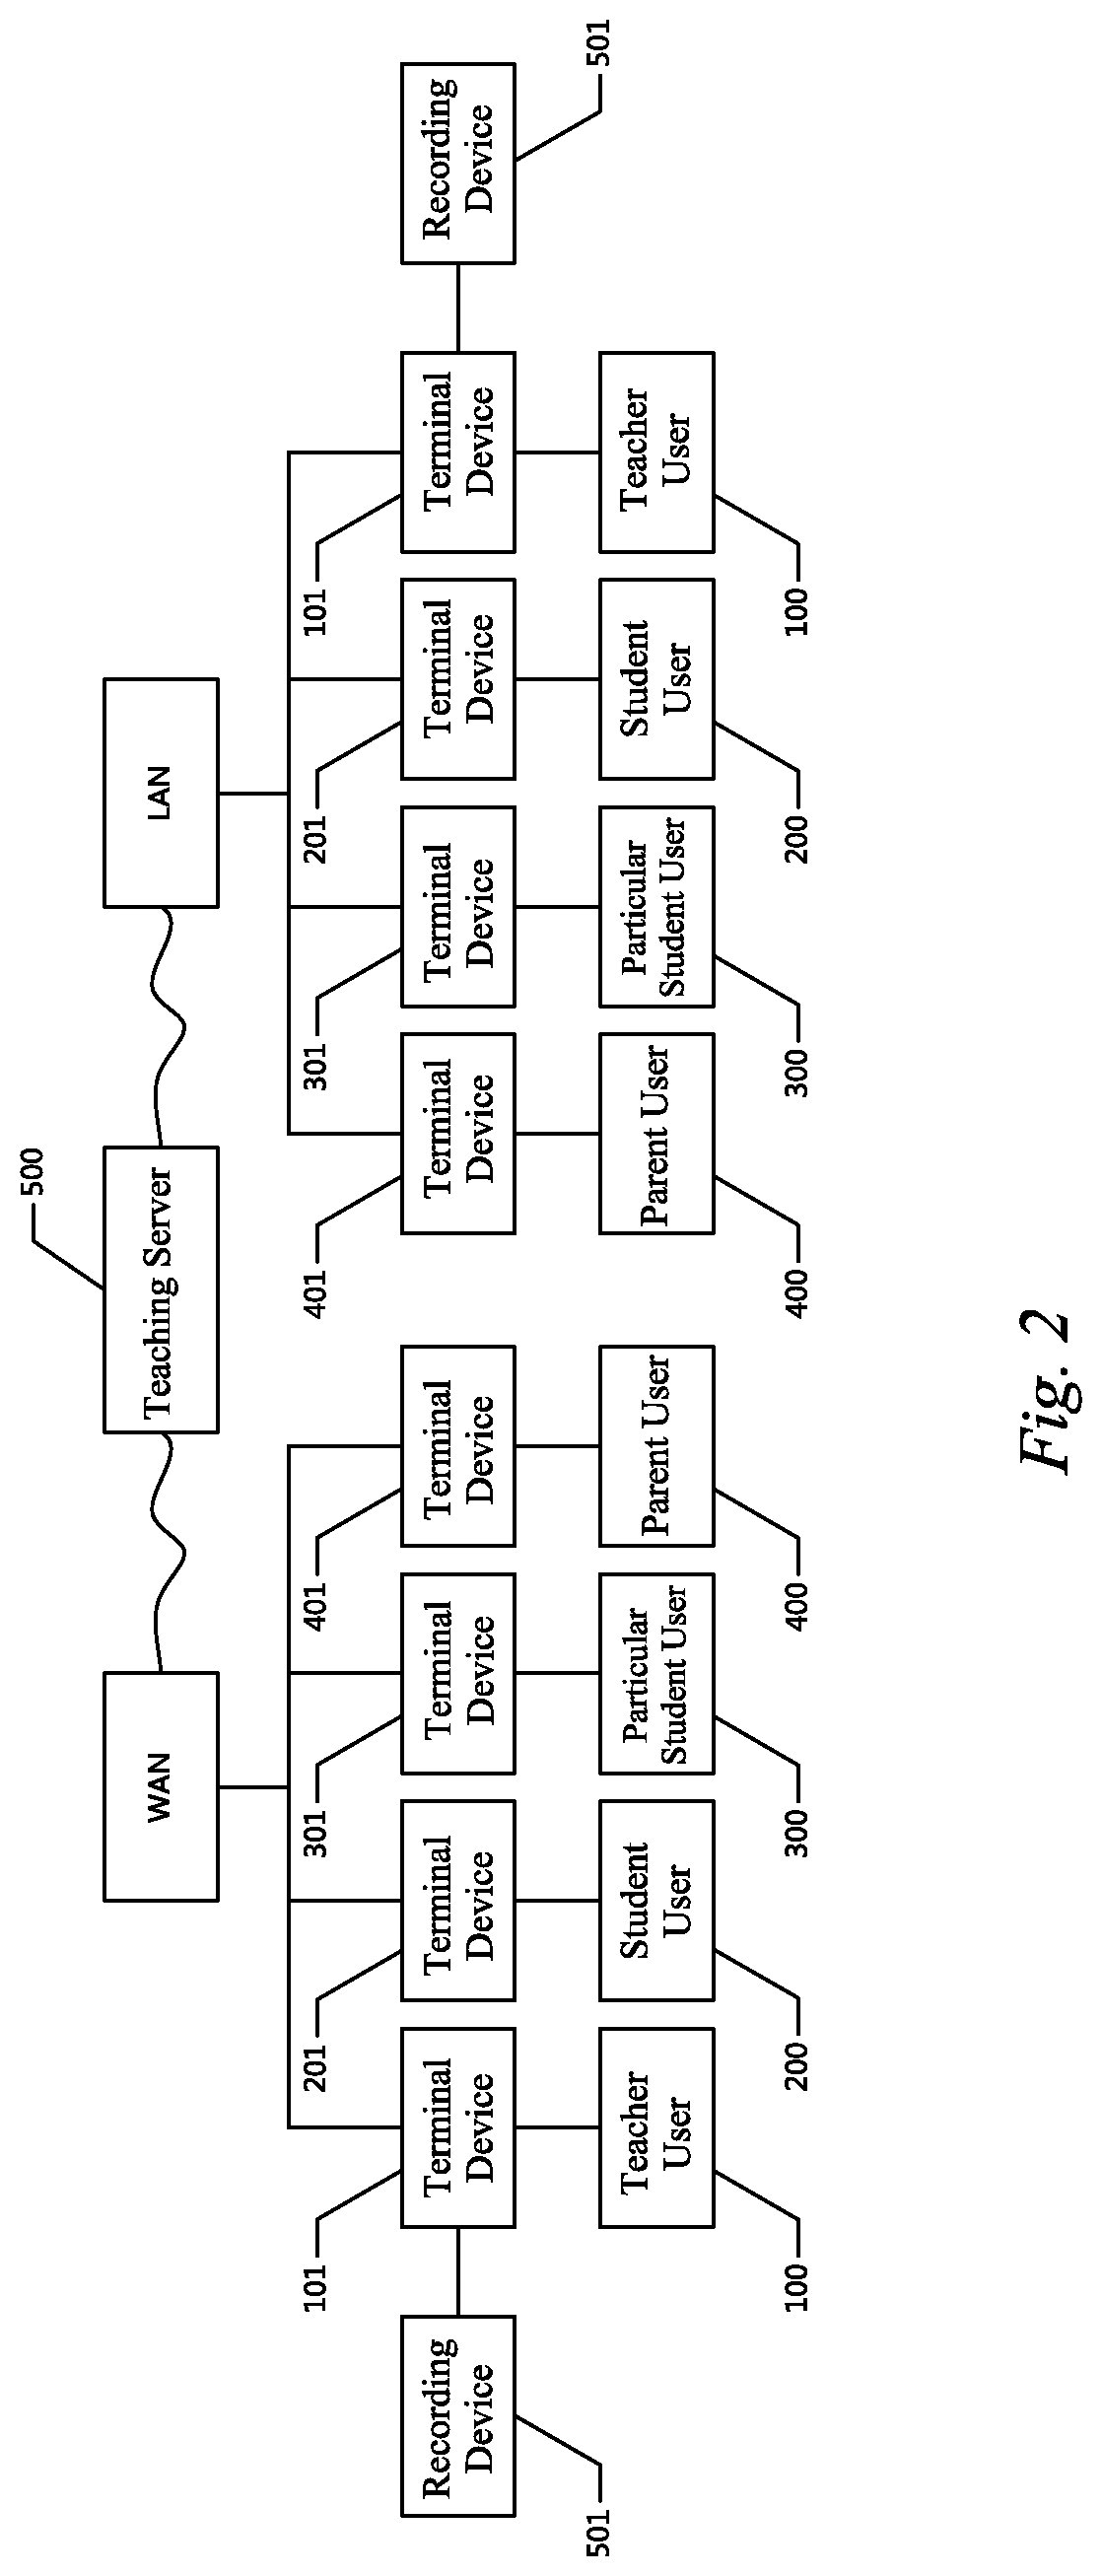 Internet-based recorded course learning following system and method